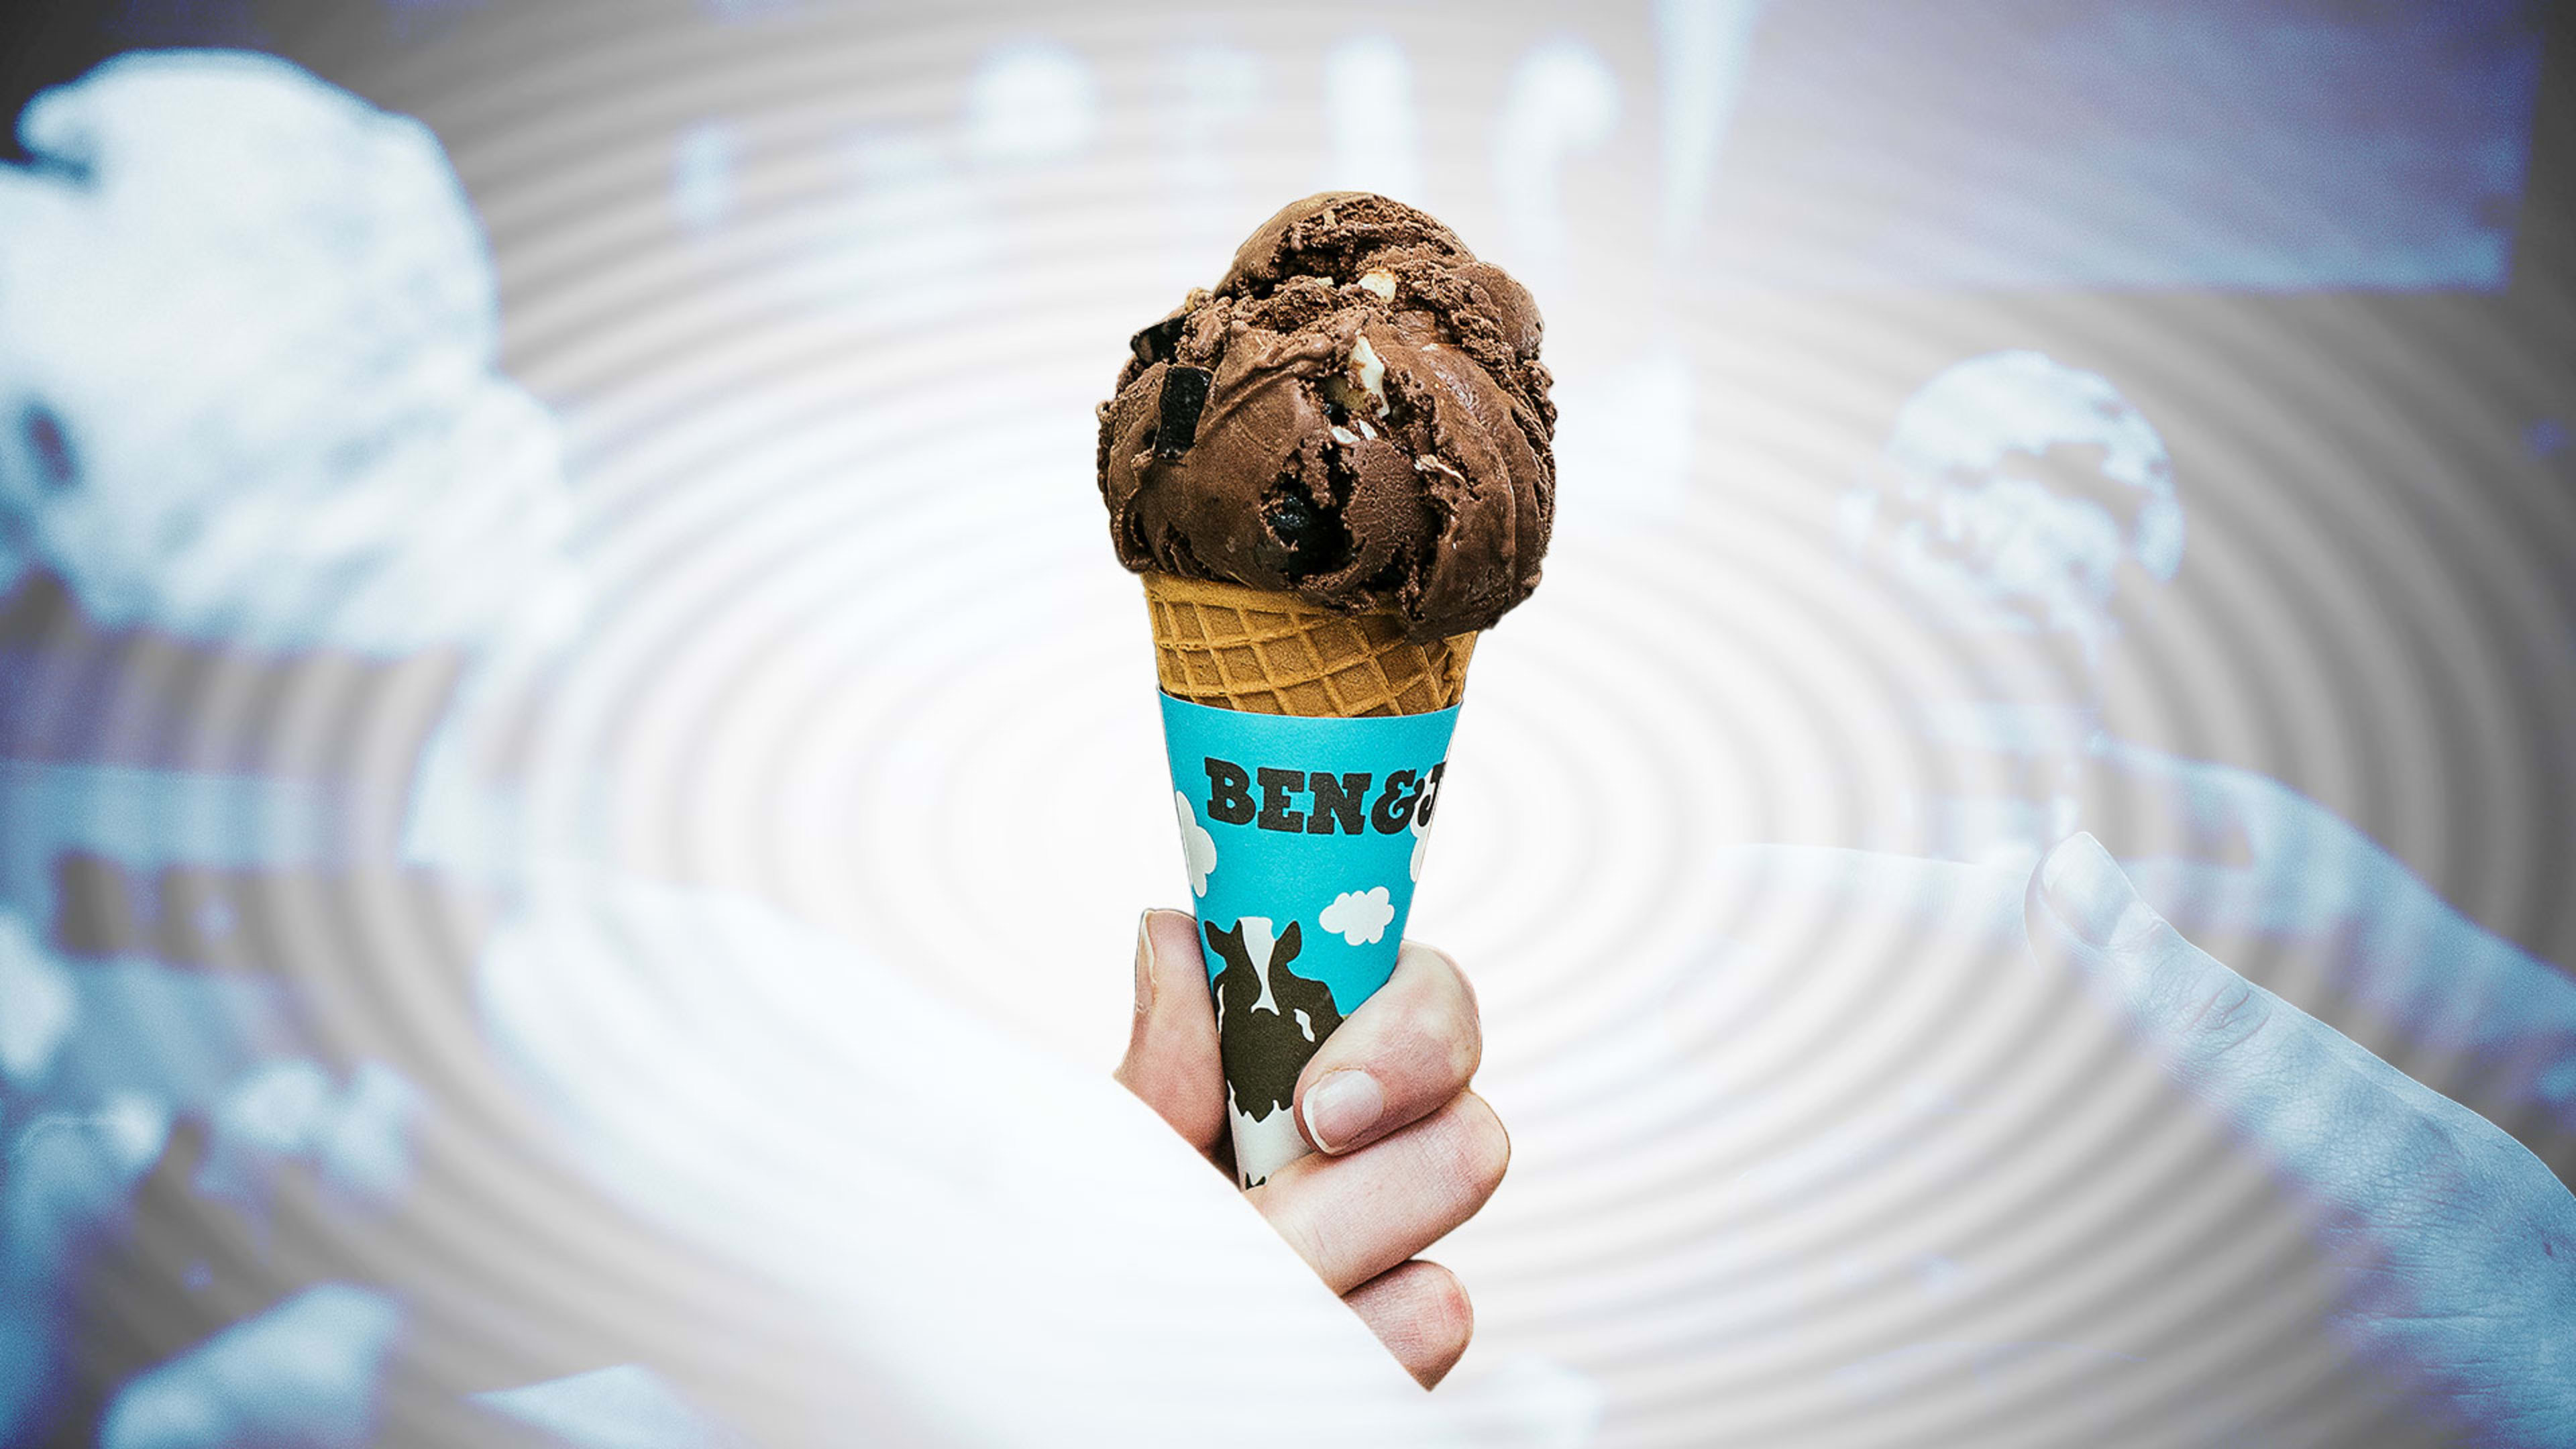 Update: Ben & Jerry’s says it welcomes unionization efforts by Vermont ice cream scoopers